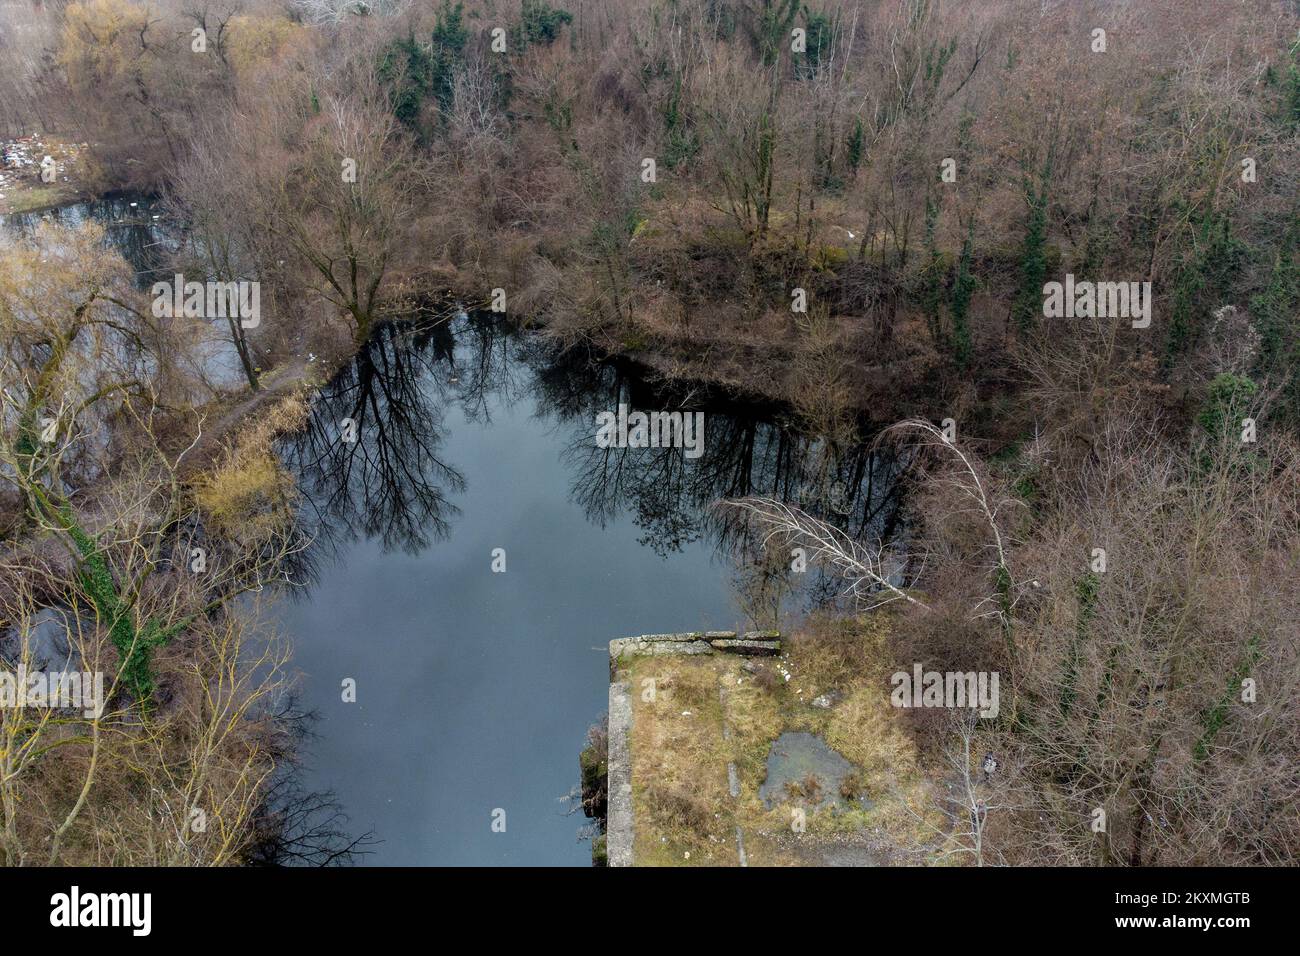 Aerial photo of one of the largest remaining German bunkers from the WW2 in Croatia, in Zagreb, Craotia, February 03, 2021. In the forest next to small lakes in the Crnomerec in Zagreb, there is one of the largest remaining German bunkers from the Second World War in Croatia. It is a Regelbau B anti-aircraft overhead bunker made of concrete and steel that was part of a complex of five bunkers near the former headquarters of the 7th SS Division Prinz Eugen. After the complex was destroyed in 1945 during the withdrawal of the German army, two bunkers remained visible and have since fallen into o Stock Photo